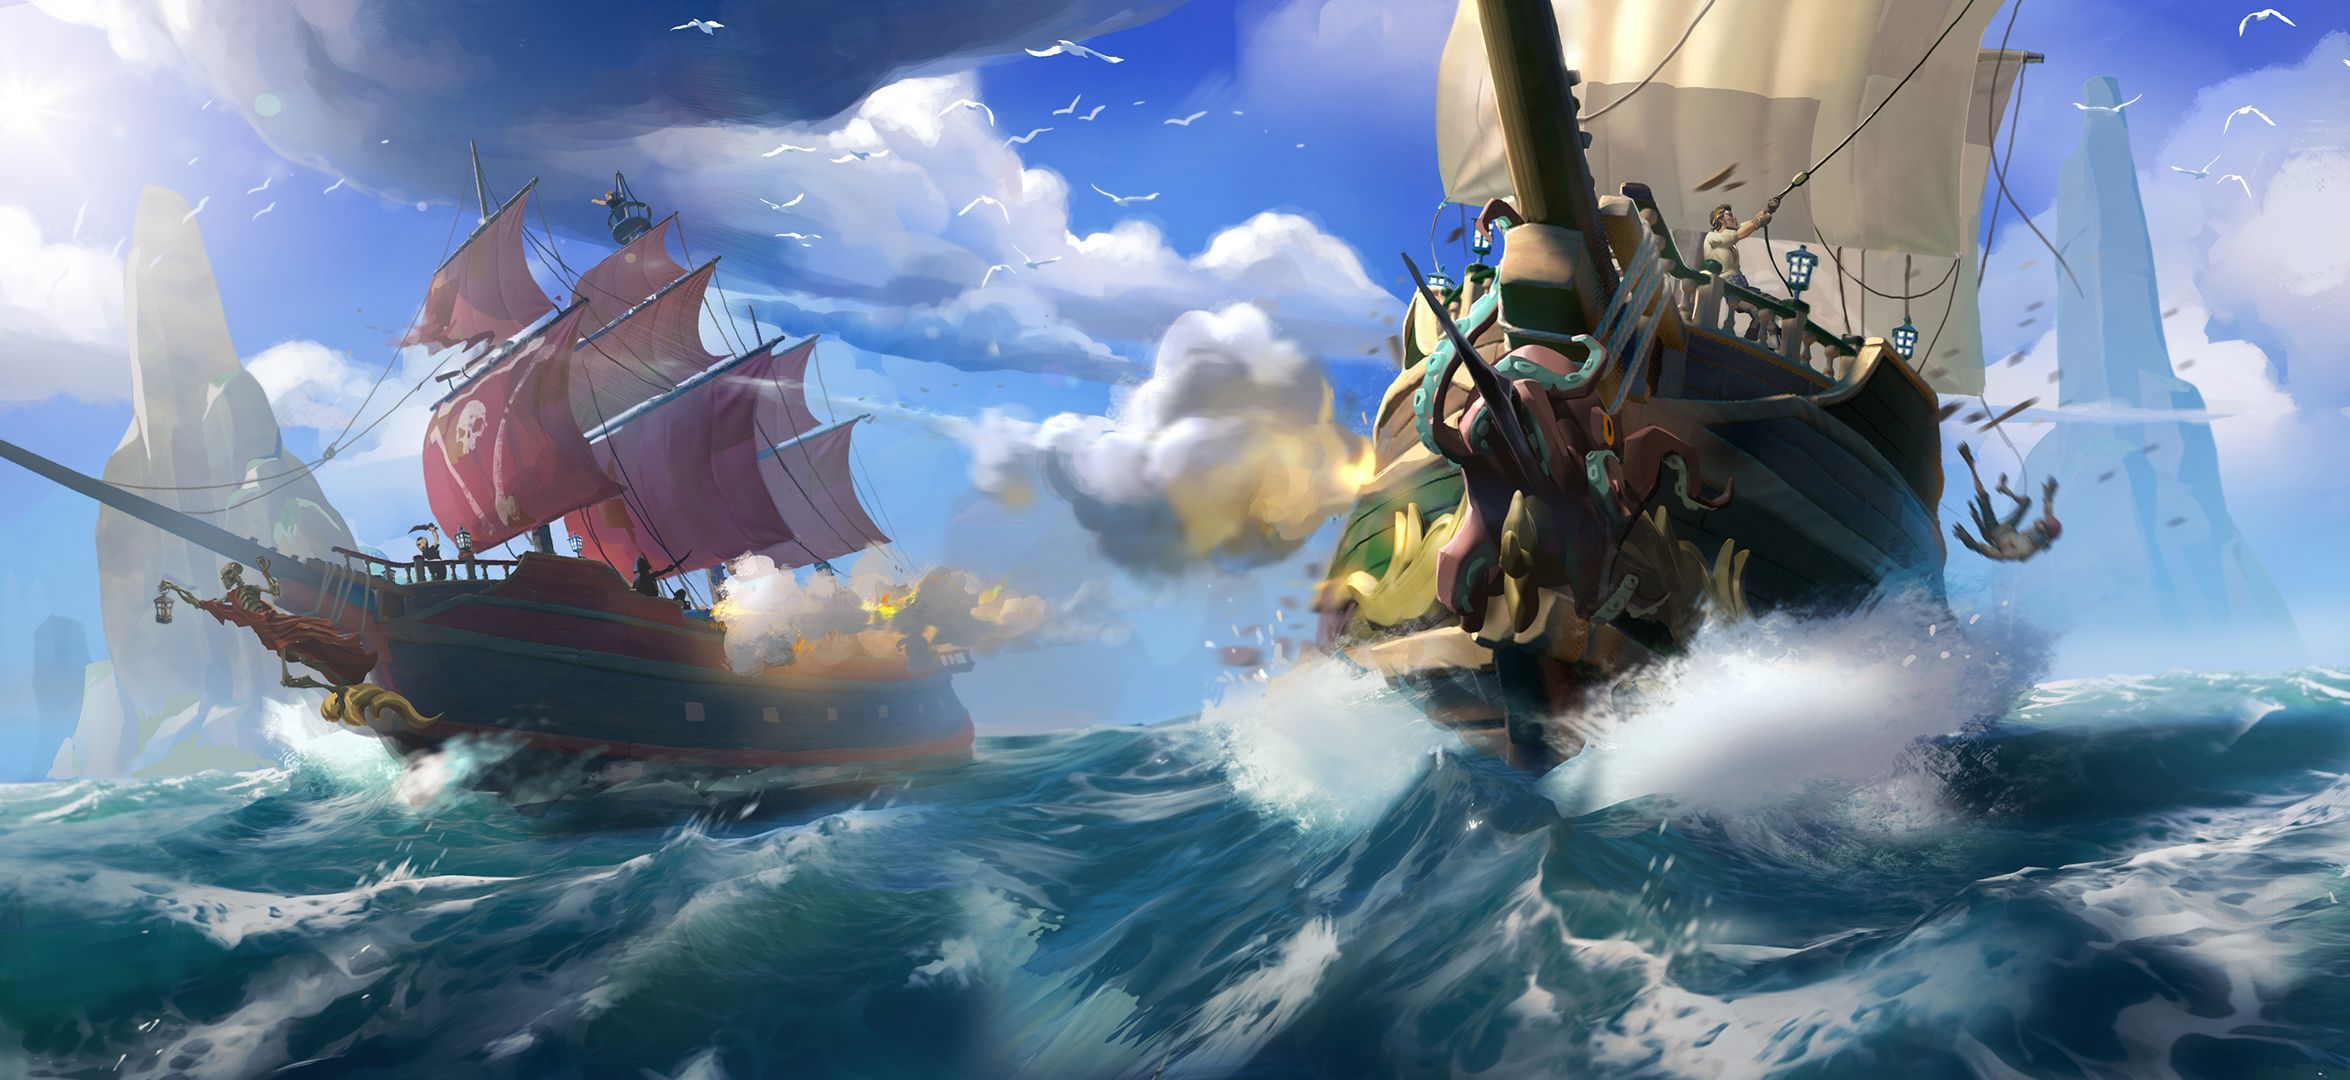 Sea of Thieves, HQ Background. HD wallpaper Gallery. Gallsource.com. Sea of thieves, Pirate adventure, Concept art world